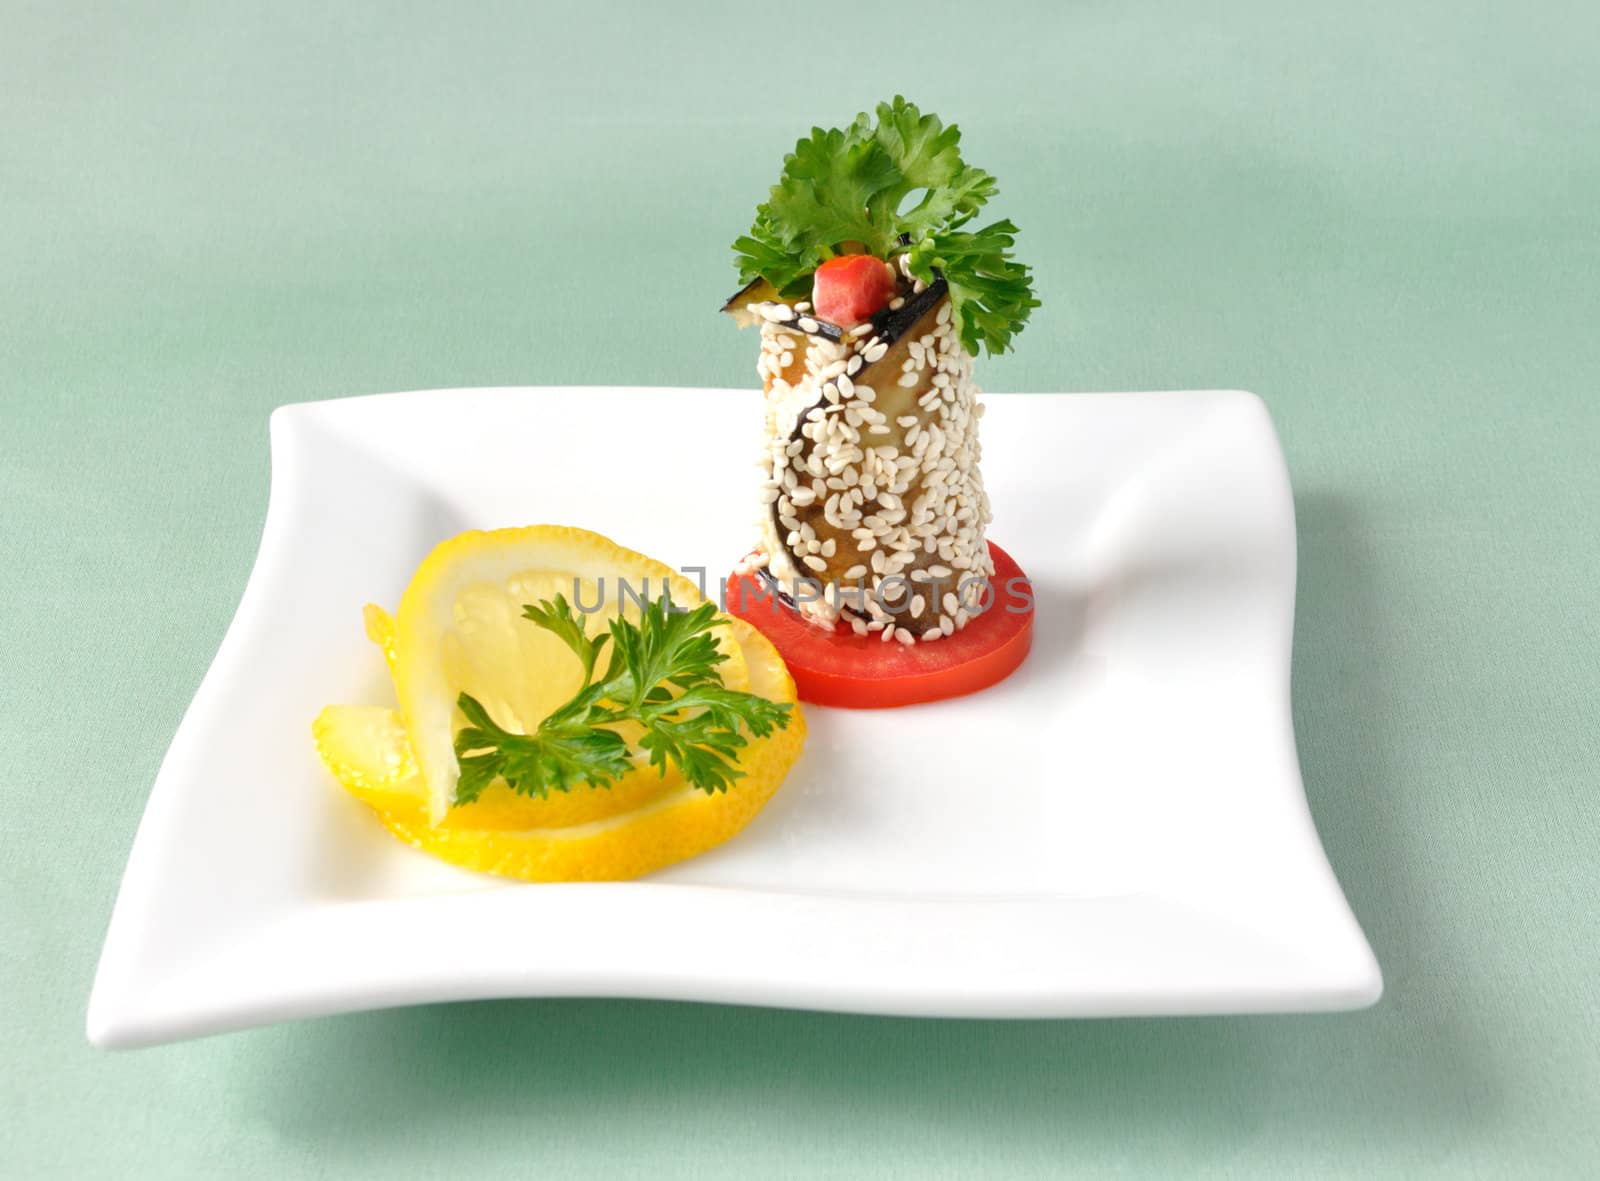  Roulade of eggplant with tomatoes in sesame seeds with lemon and herbs                